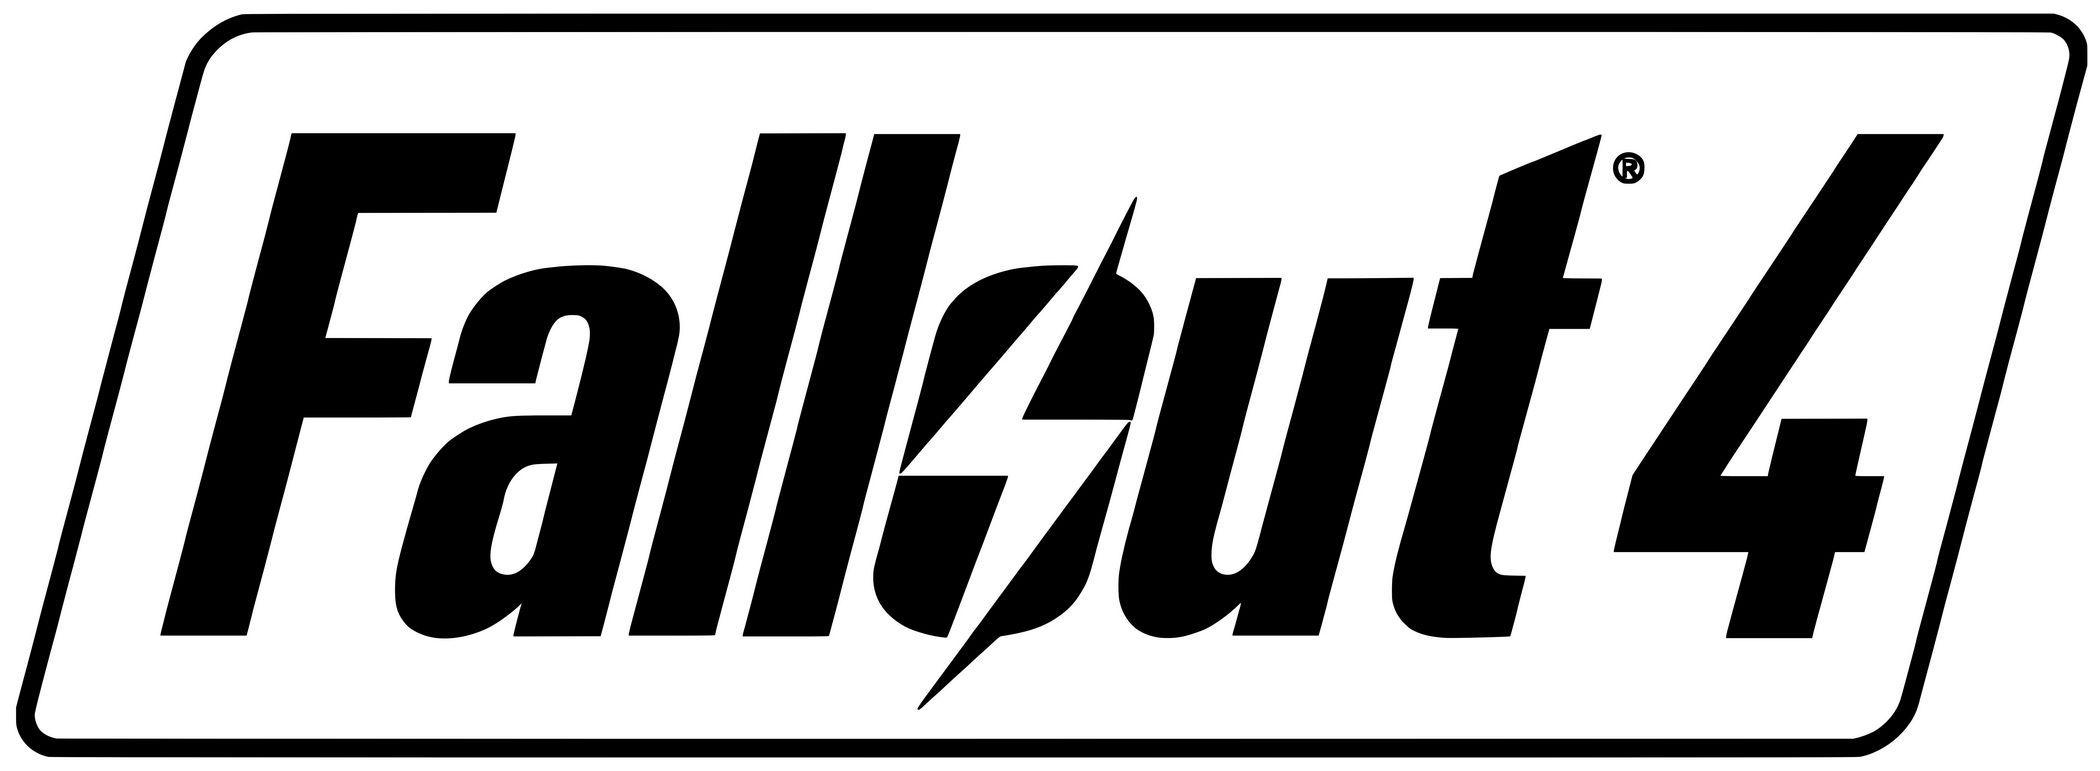 Fallout Logo - Fallout Logo | Fallout | Fallout logo, Fallout 4 weapons, Fallout 4 ...